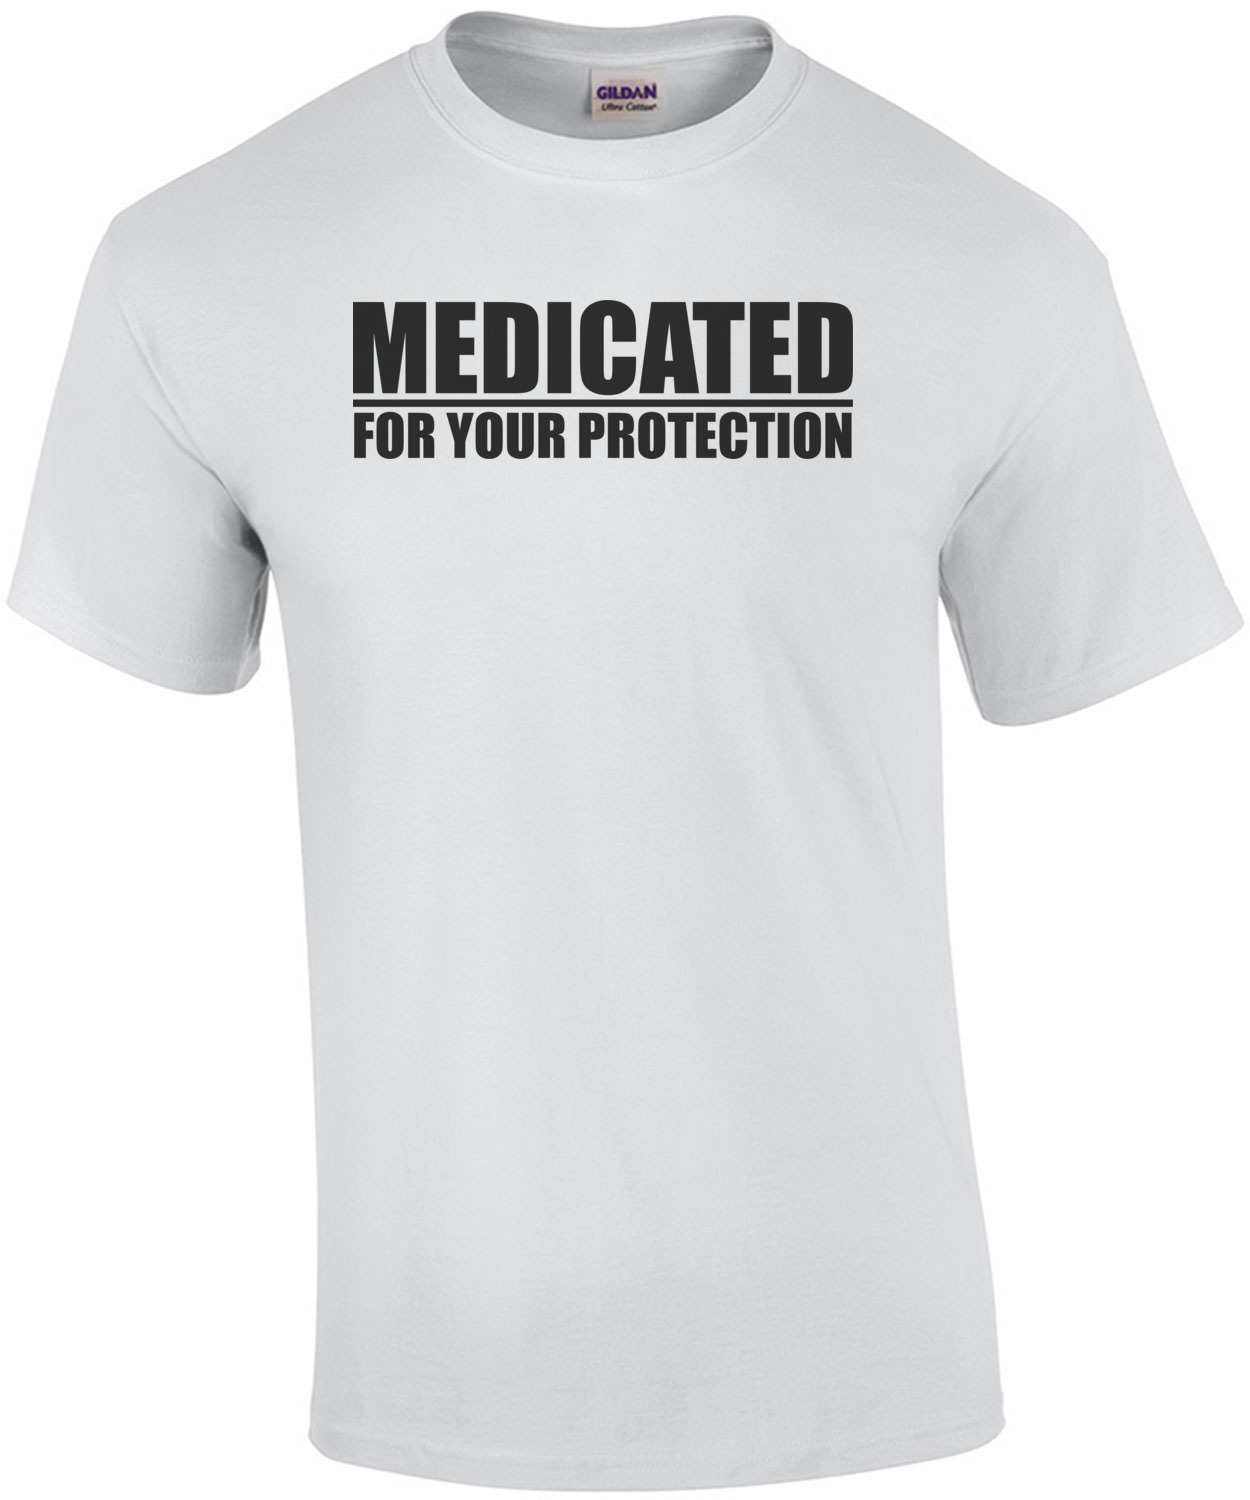 Medicated - For Your Protection shirt